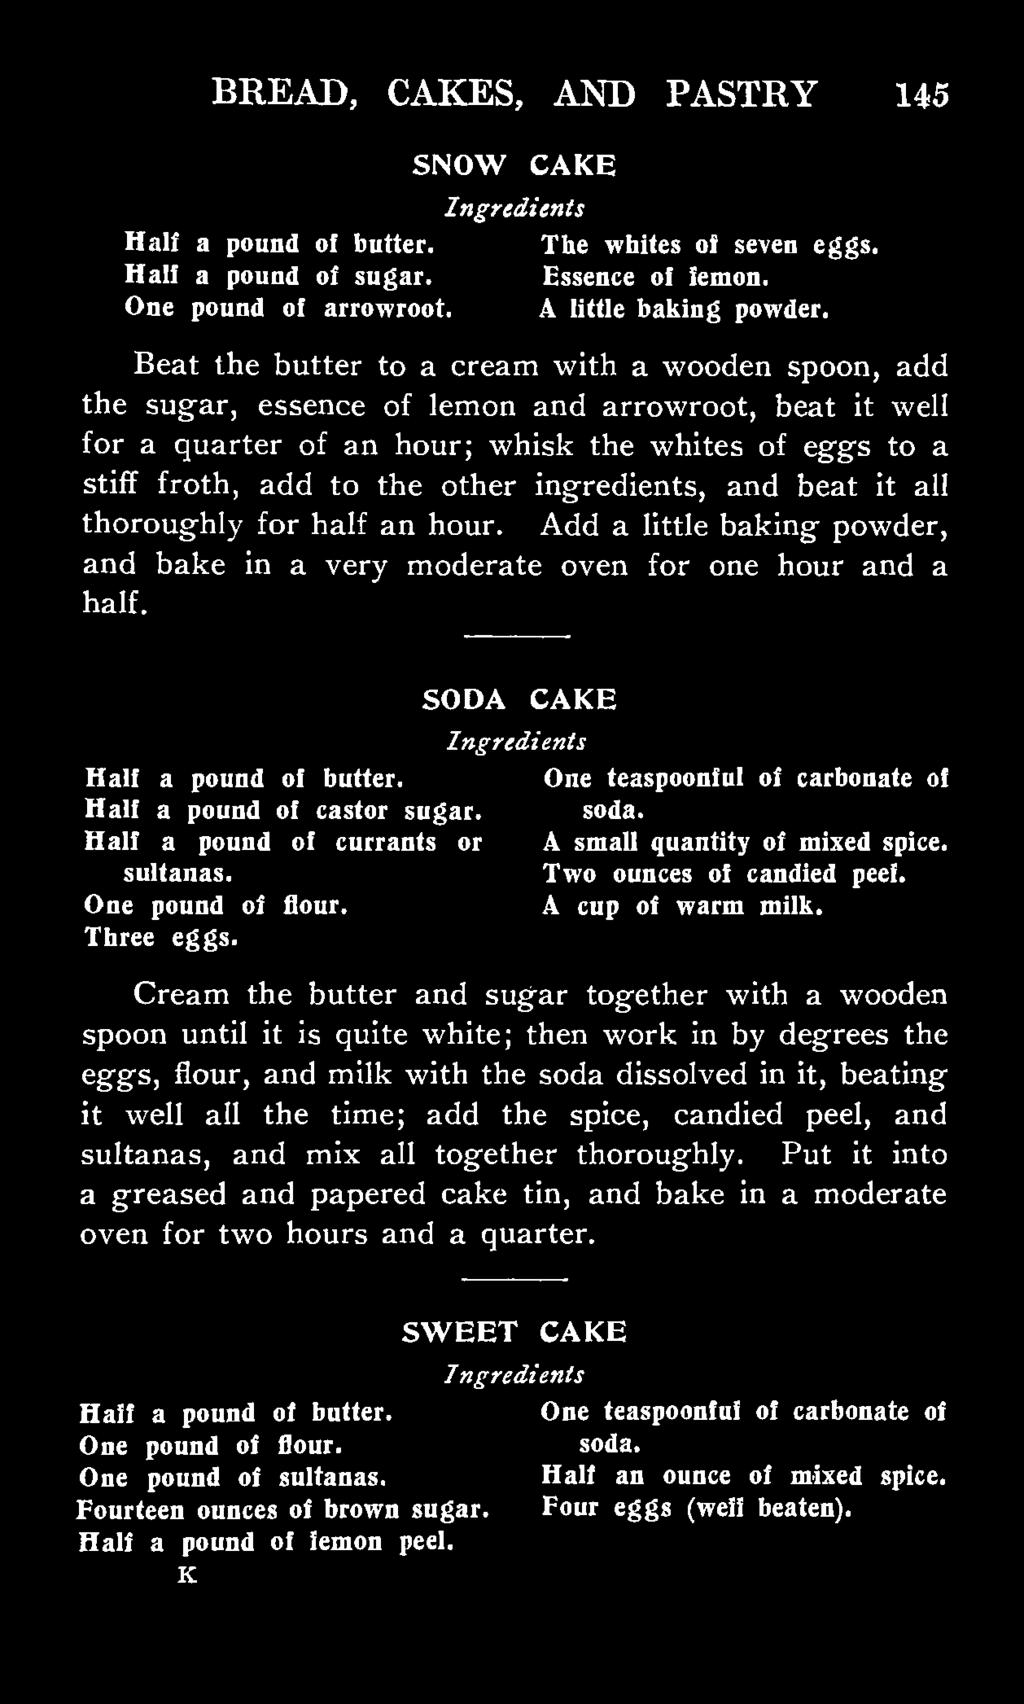 ingredients, and beat it all thoroughly for half an hour. Add a little baking powder, and bake in a very moderate oven for one hour and a half. SODA CAKE Half a pound of butter.